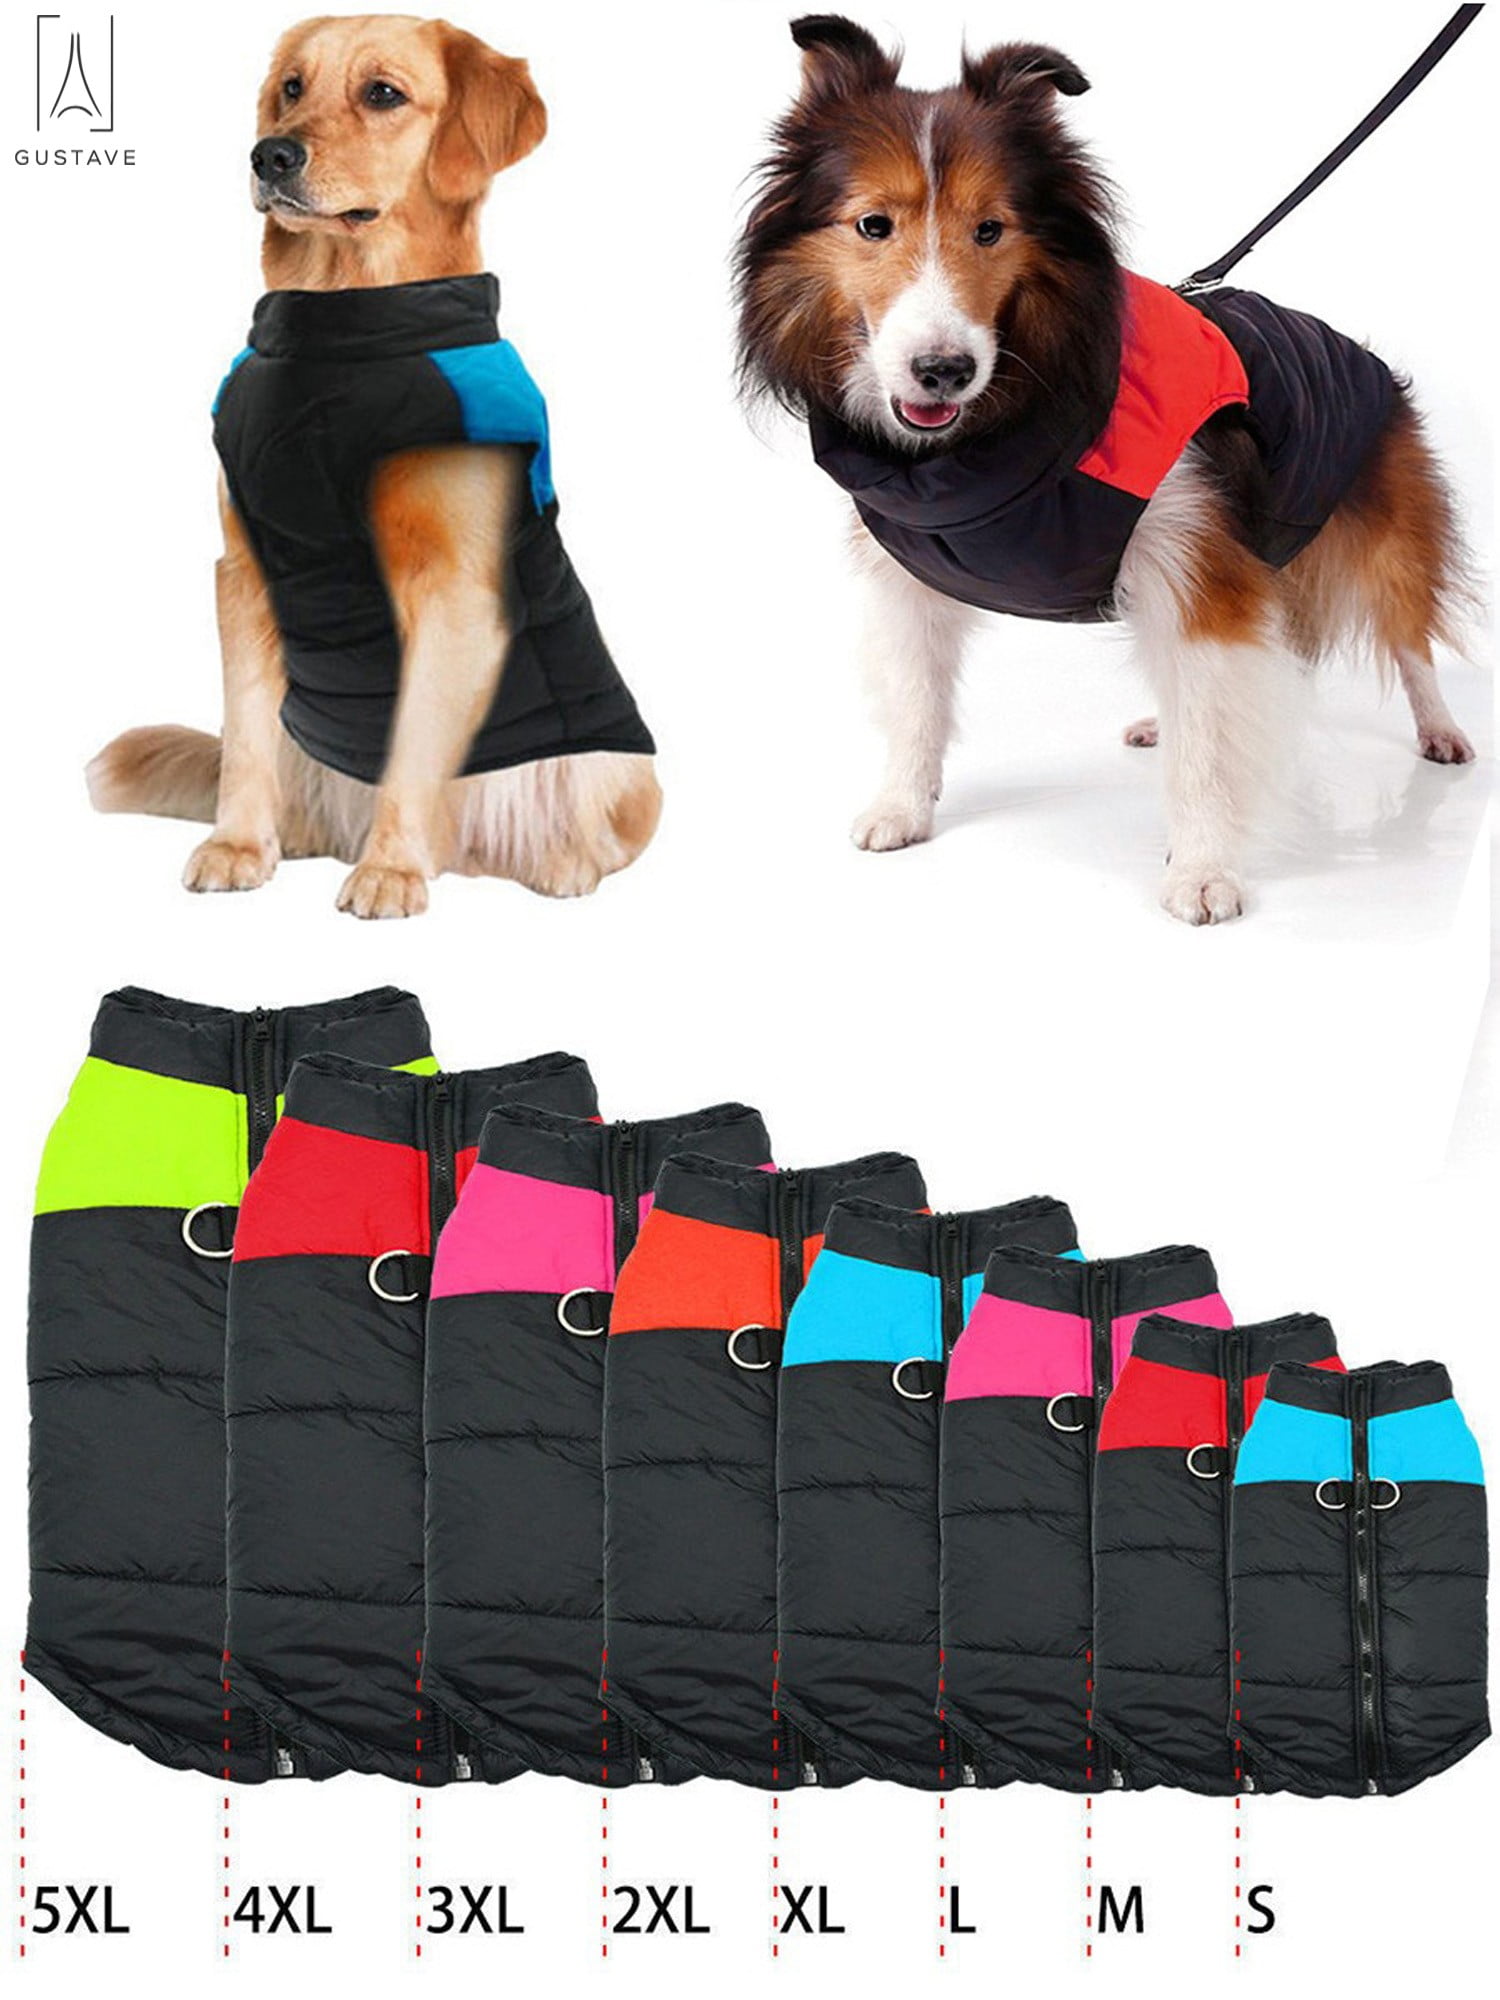 Runbow Jacket Dog Coat Reversible Dog Winter Coat Dog Winter Jacket with Reflective Accents Dog Vest with Hoodie for Small Medium